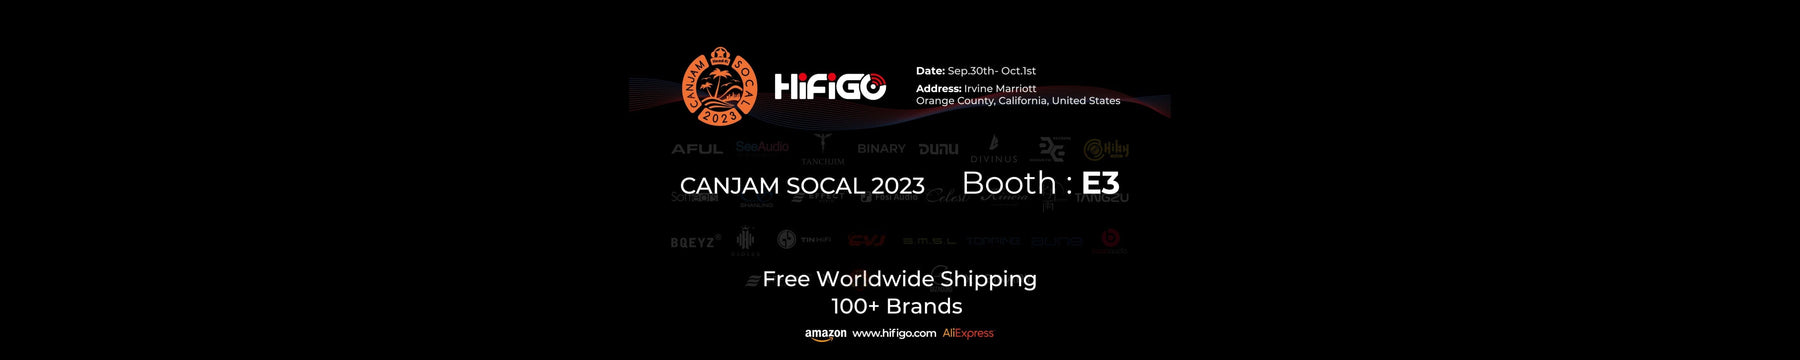 HiFiGo Is Coming To The CanJam SoCal 2023: Prepare Yourself To Experience Exciting Products from 20+ Brands!!